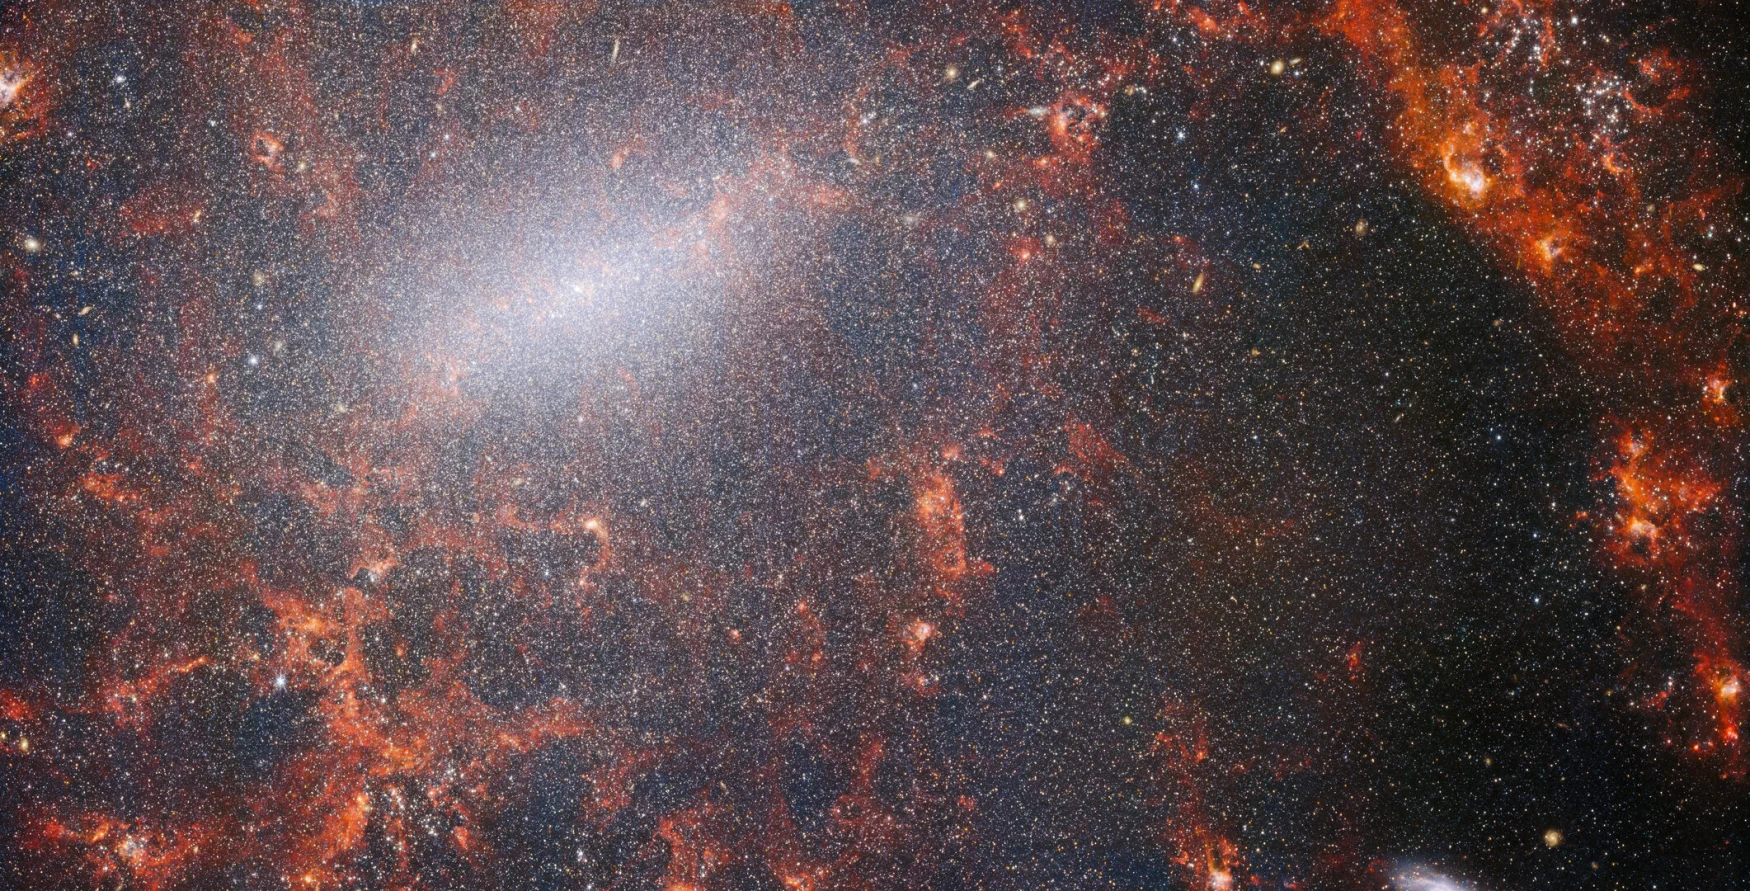 A delicate tracery of dust and bright star clusters threads across this image from the NASA/ESA/CSA James Webb Space Telescope. This view from WebbРђЎs NIRCam instrument is studded by the galaxyРђЎs massive population of stars, most dense along its bright central bar, along with burning red clouds of gas illuminated by young stars within. These glittering stars belong to the barred spiral galaxy NGC 5068, located around 17 million light-years from Earth in the constellation Virgo. This portrait of NGC 5068 is part of a campaign to create an astronomical treasure trove, a repository of observations of star formation in nearby galaxies. Previous gems from this collection can be seen here and here. These observations are particularly valuable to astronomers for two reasons. The first is because star formation underpins so many fields in astronomy, from the physics of the tenuous plasma that lies between stars to the evolution of entire galaxies. By observing the formation of stars in nearby galaxies, astronomers hope to kick-start major scientific advances with some of the first available data from Webb. The second reason is that WebbРђЎs observations build on other studies using telescopes including the NASA/ESA Hubble Space Telescope and some of the worldРђЎs most capable ground-based observatories. Webb collected images of 19 nearby star-forming galaxies which astronomers could then combine with catalogues from Hubble of 10 000 star clusters, spectroscopic mapping of 20├ѓ 000 star-forming emission nebulae from the Very Large Telescope (VLT), and observations of 12├ѓ 000 dark, dense molecular clouds identified by the Atacama Large Millimeter/submillimeter Array (ALMA). These observations span the electromagnetic spectrum and give astronomers an unprecedented opportunity to piece together the minutiae of star formation. This near-infrared image of the galaxy is filled by the enormous gathering of older stars which make up the core of NGC 5068. The keen vision of NIRCam allows astronomers to peer through the galaxyРђЎs gas and dust to closely examine its stars. Dense and bright clouds of dust lie along the path of the spiral arms: these are H II regions, collections of hydrogen gas where new stars are forming. The young, energetic stars ionise the hydrogen around them which, when combined with hot dust emission, creates this reddish glow. H II regions form a fascinating target for astronomers, and WebbРђЎs instruments are the perfect tools to examine them, resulting in this image. [Image Description: A close-in image of a spiral galaxy, showing its core and part of a spiral arm. At this distance thousands upon thousands of tiny stars that make up the galaxy can be seen. The stars are most dense in a whitish bar that forms the core, and less dense out from that towards the arm. Bright red gas clouds follow the twist of the galaxy and the spiral arm.] Links NGC 5068 (NIRCam+MIRI Image) NGC 5068 (MIRI Image) Slider Tool (MIRI and NIRCam images) Video: Pan of NGC 5068 Video: Webb's views of NGC 5068 (MIRI and NIRCam images) Video: Zoom into NGC 5068 